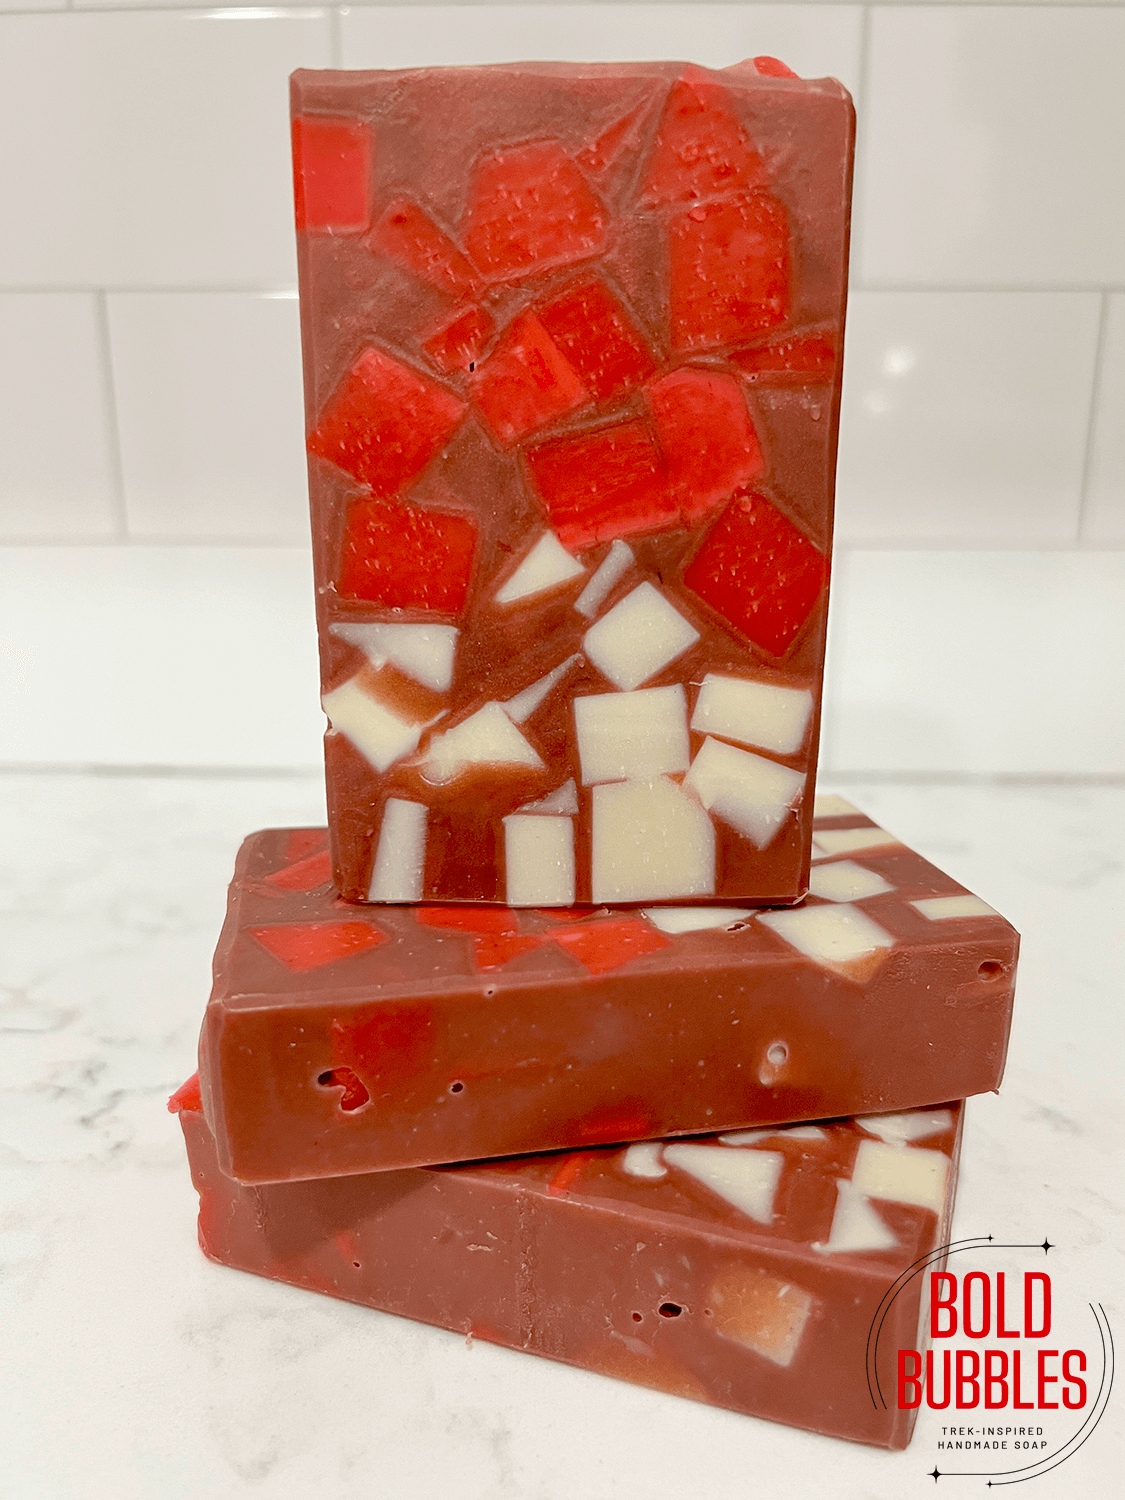 Little cubes of white on bottom, followed by cubes of red soap on top, come together with ruby red soap filling in the gaps to create this soap inspired by Rok-Tahk on Star Trek: Prodigy.